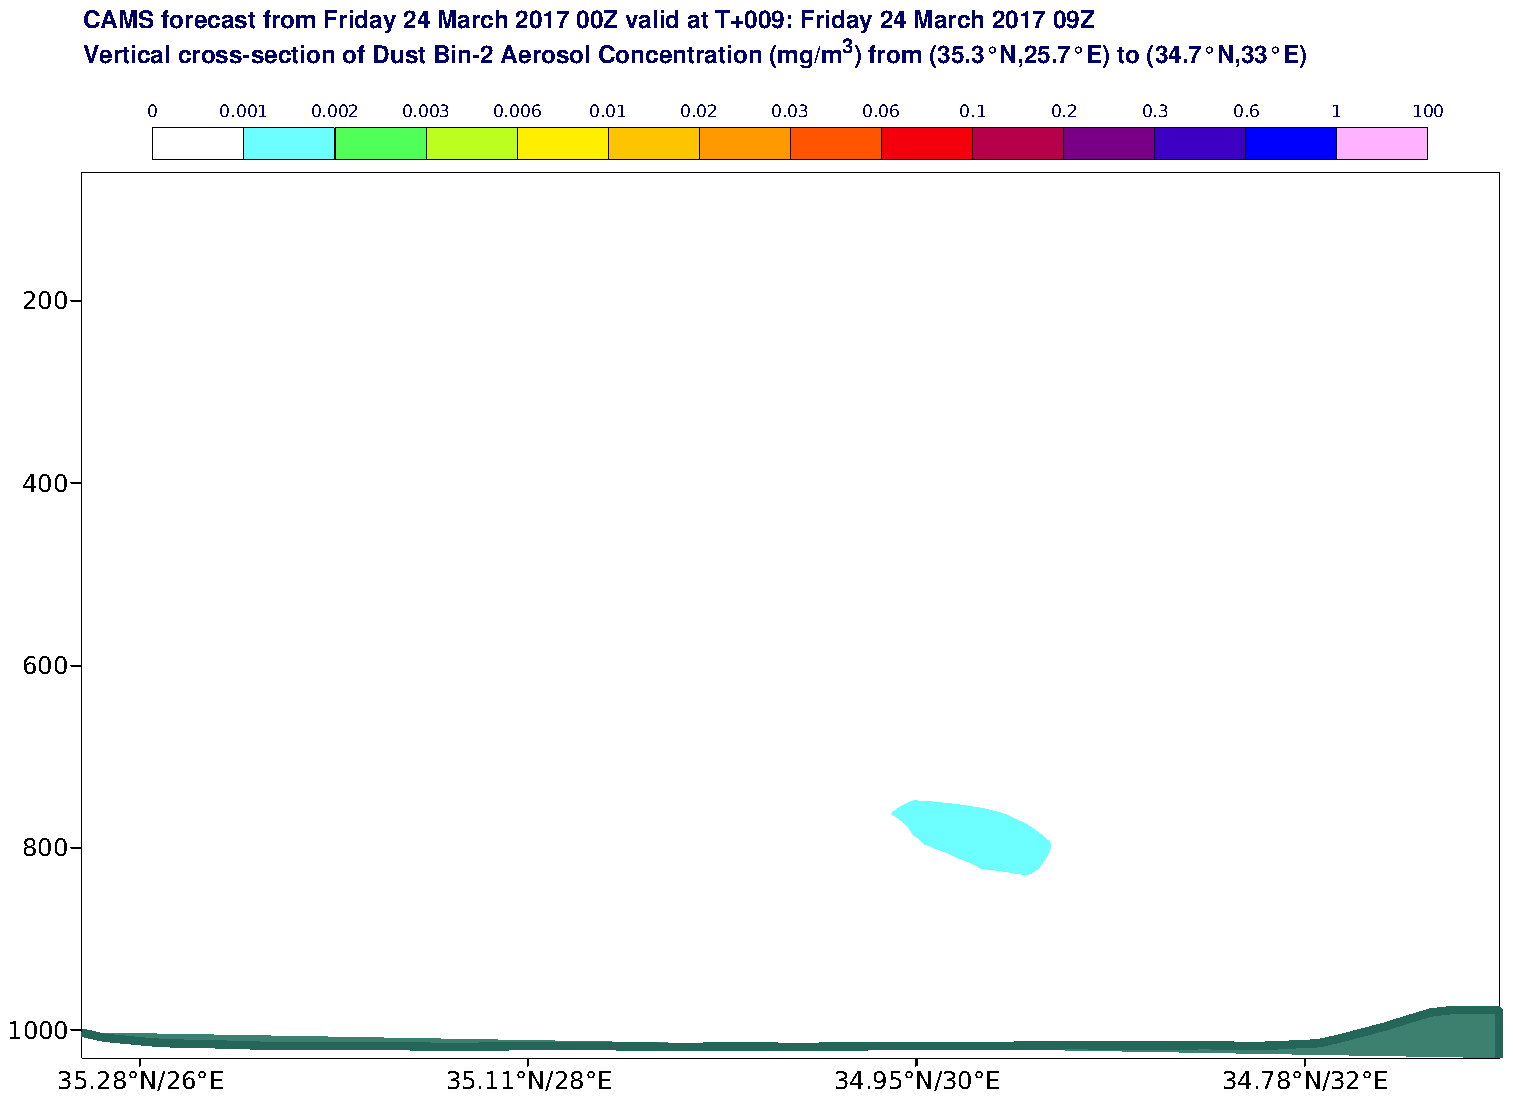 Vertical cross-section of Dust Bin-2 Aerosol Concentration (mg/m3) valid at T9 - 2017-03-24 09:00